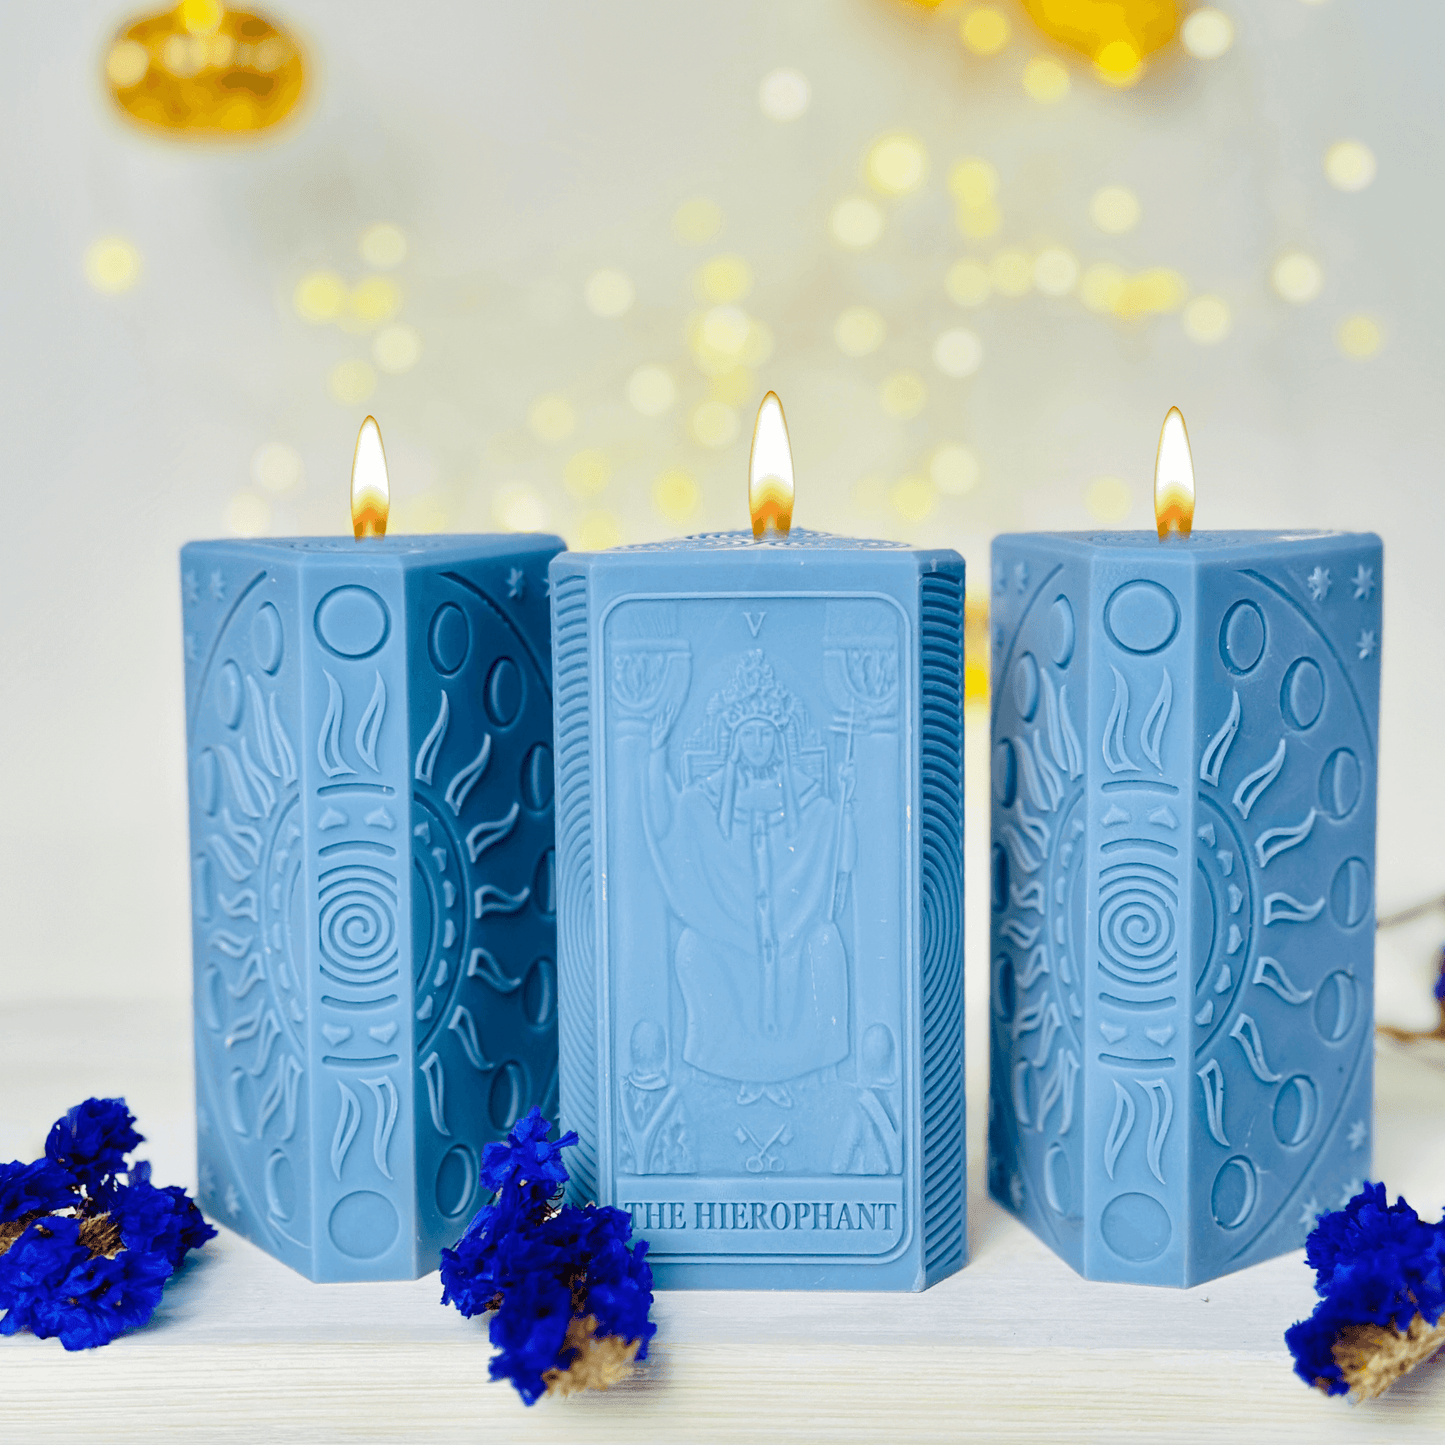 Tarot card and moon phases candle mold, The Hierophant Silicone candle mold